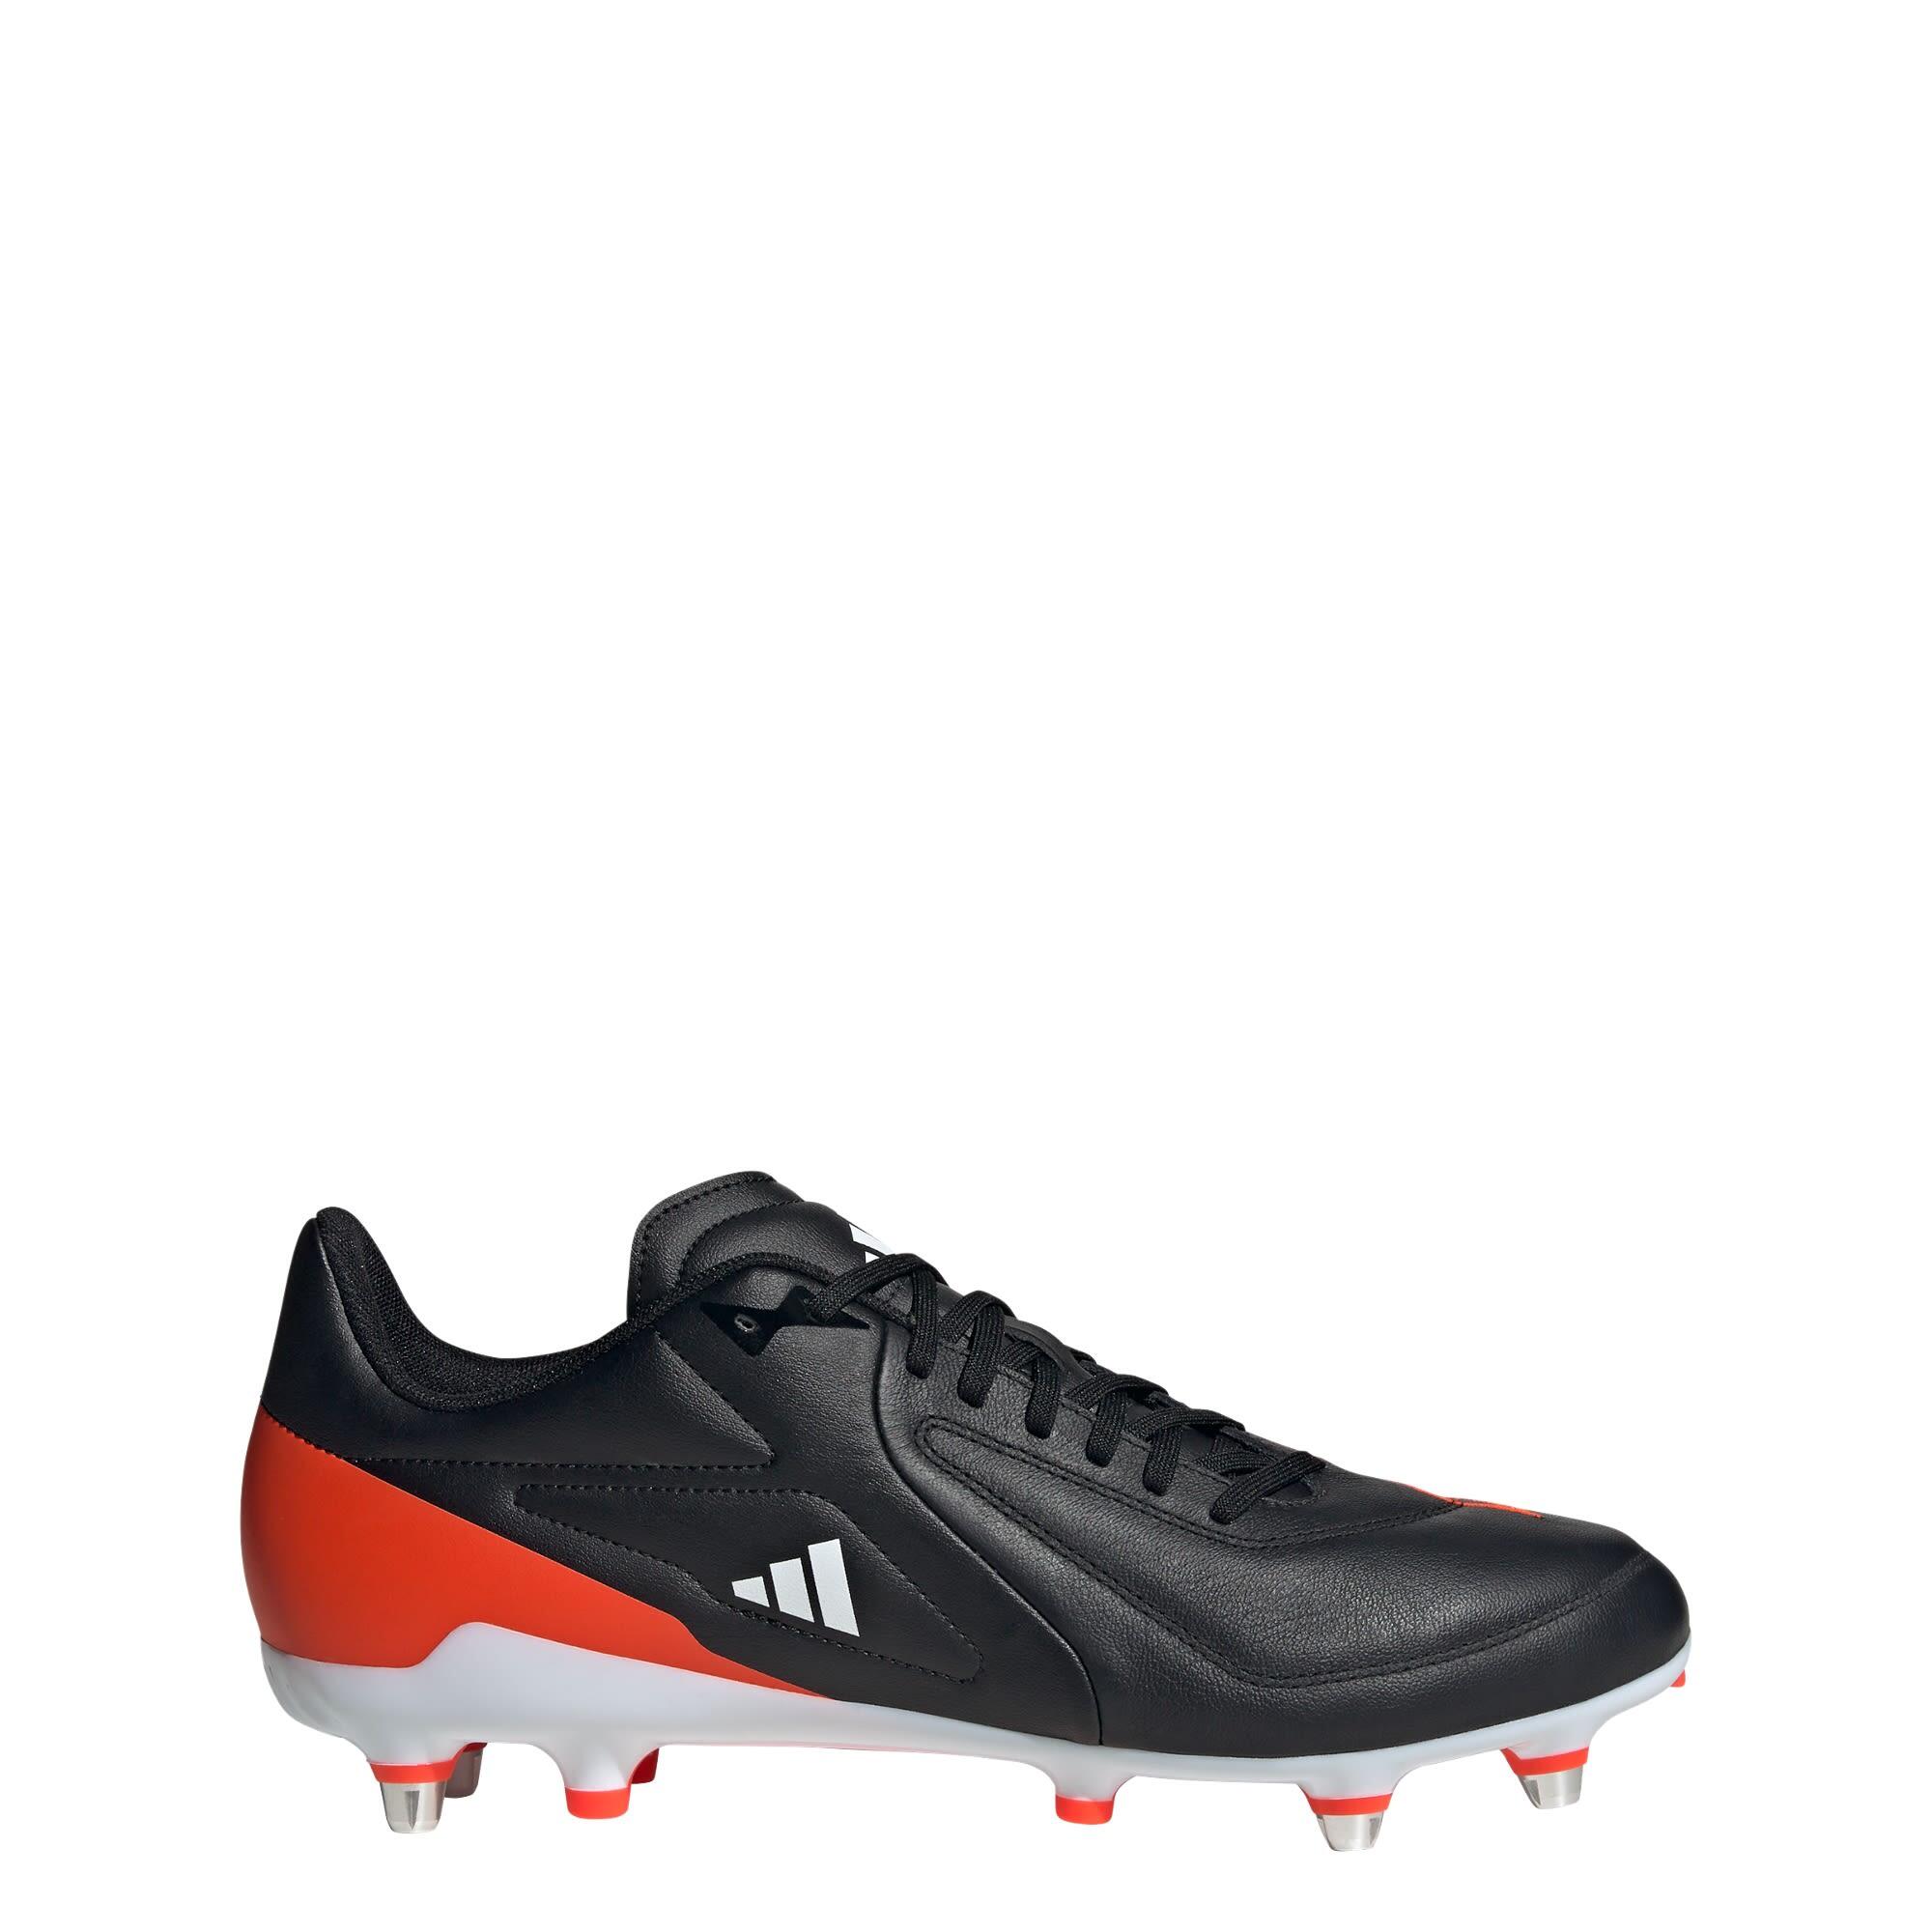 ADIDAS RS15 Elite Soft Ground Rugby Boots